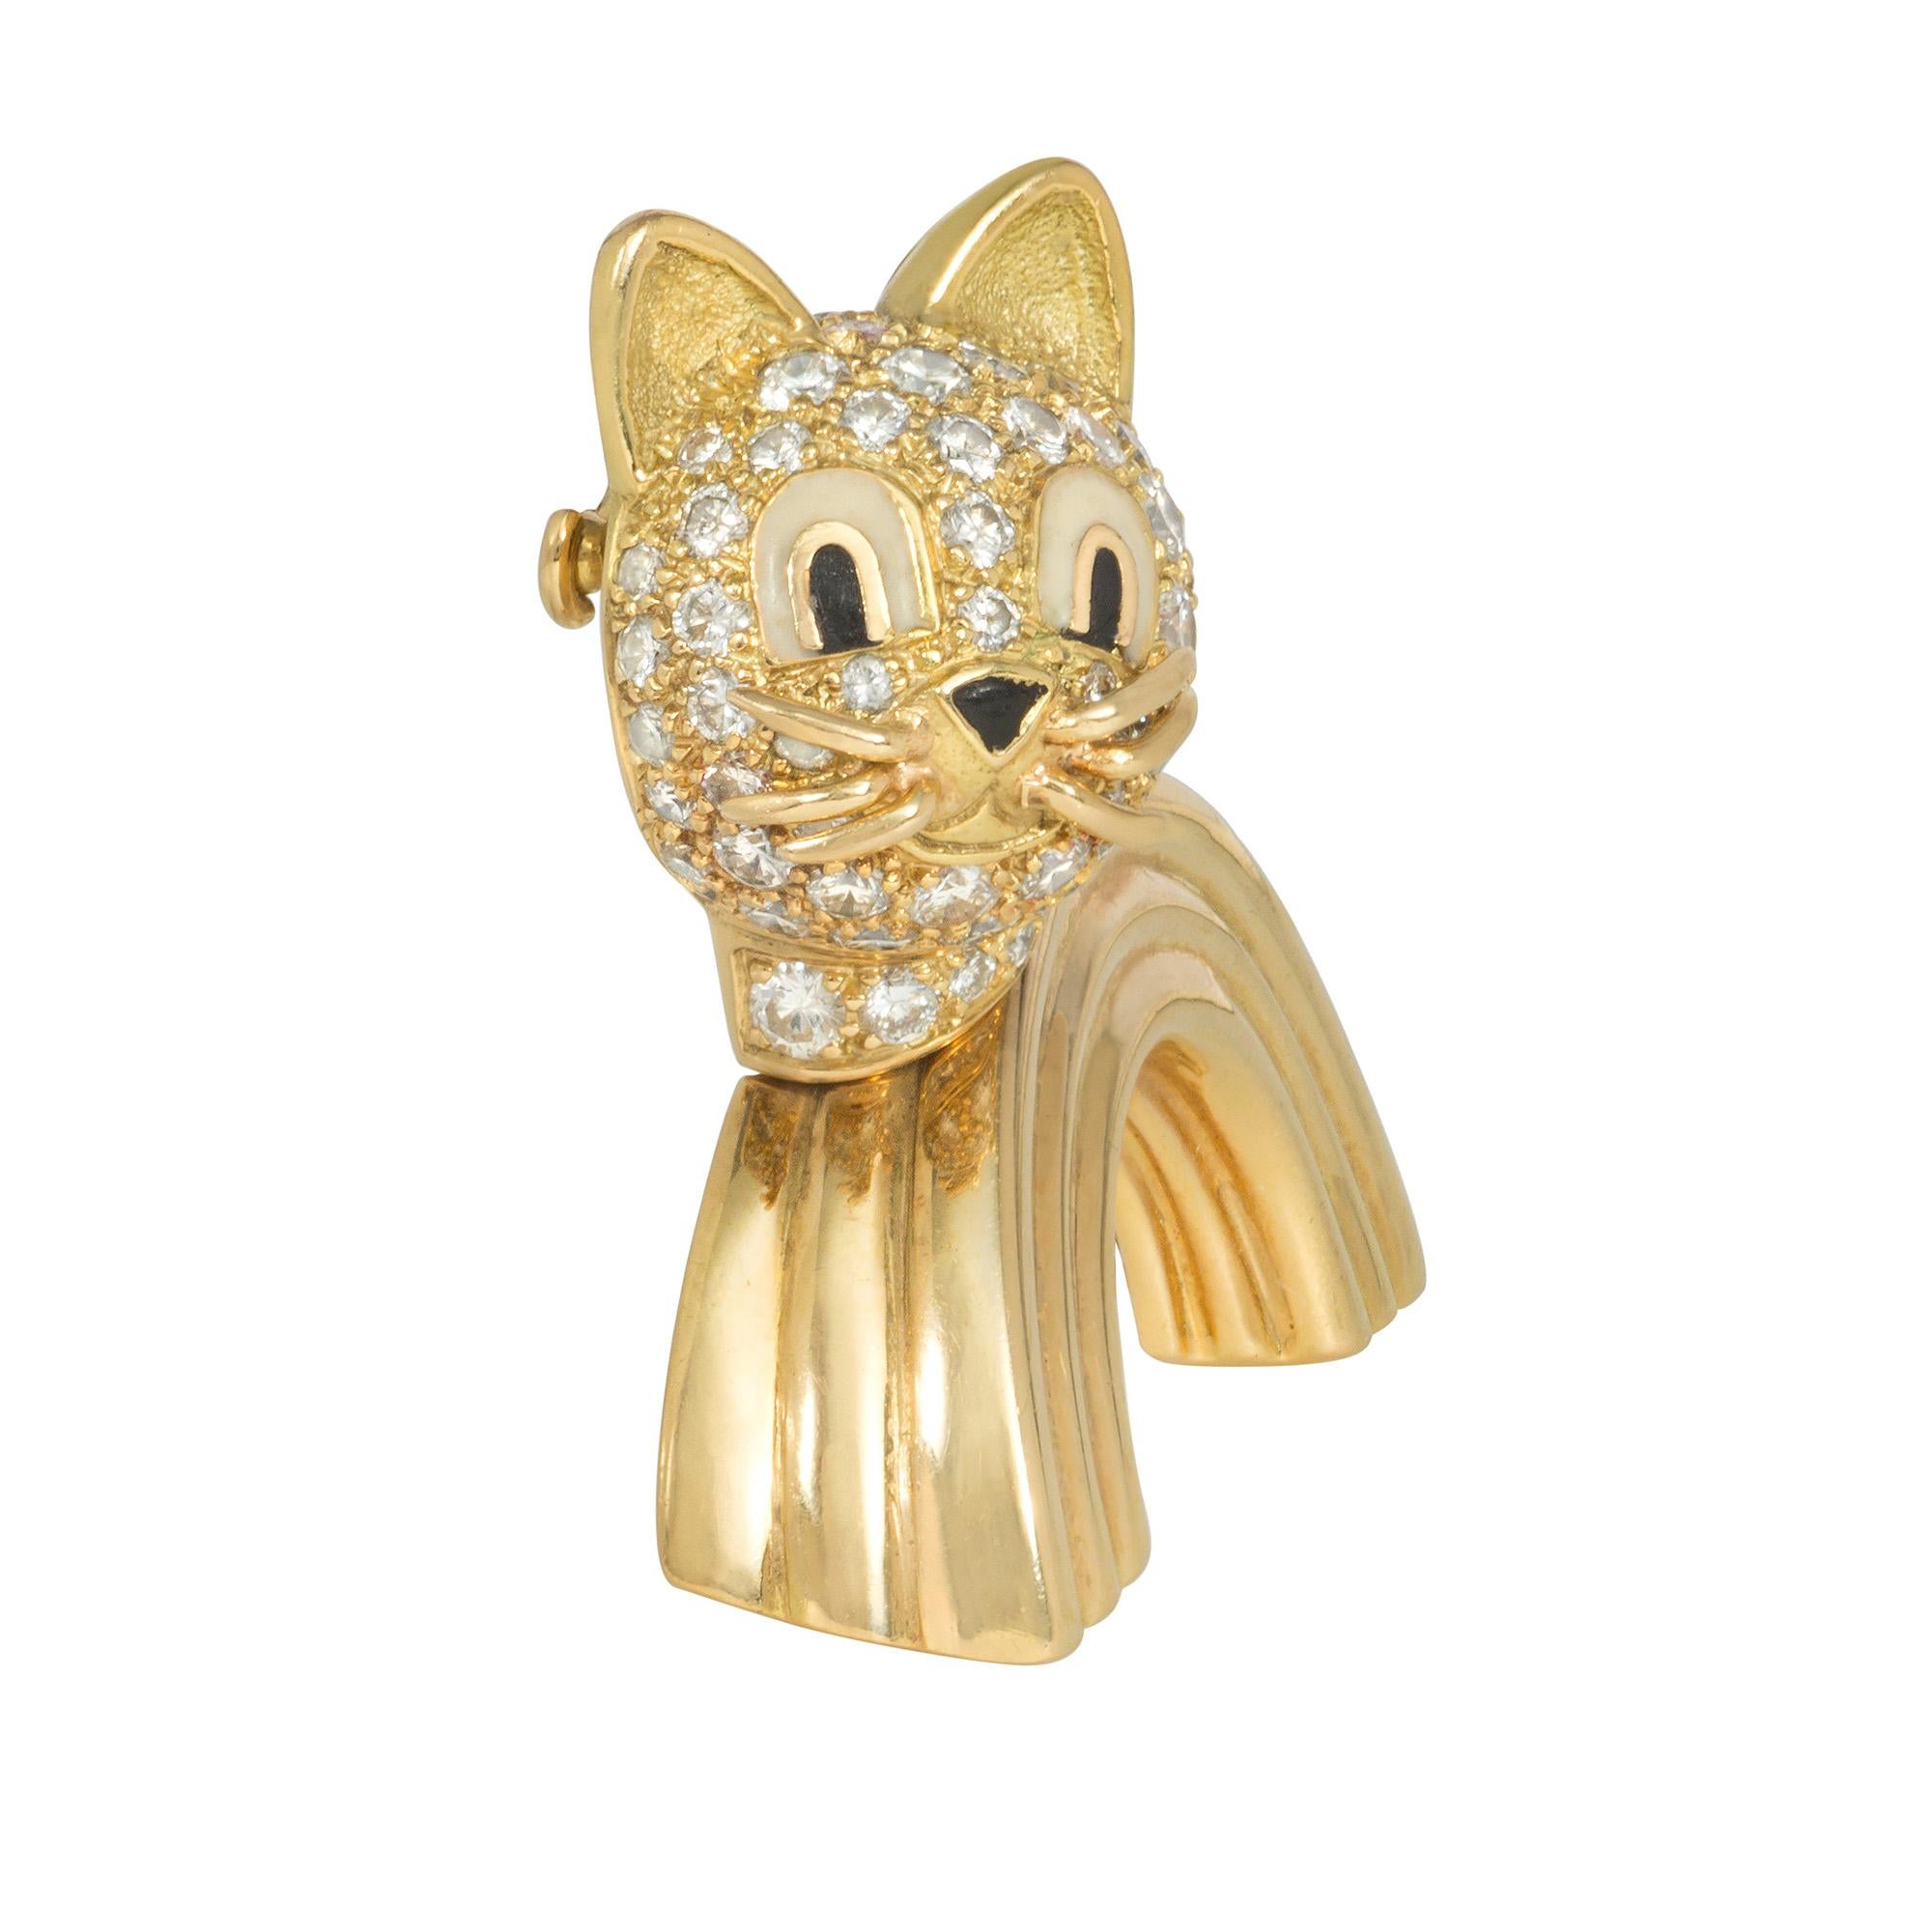 A whimsical Mid-Century gold, diamond, and enamel brooch in the form of a cat with a diamond-set head, enameled facial features, and a curved and ribbed body, in 18k and platinum.  Boucheron, France.  Atw diamonds 1.50 cts.

* Includes Kentshire's